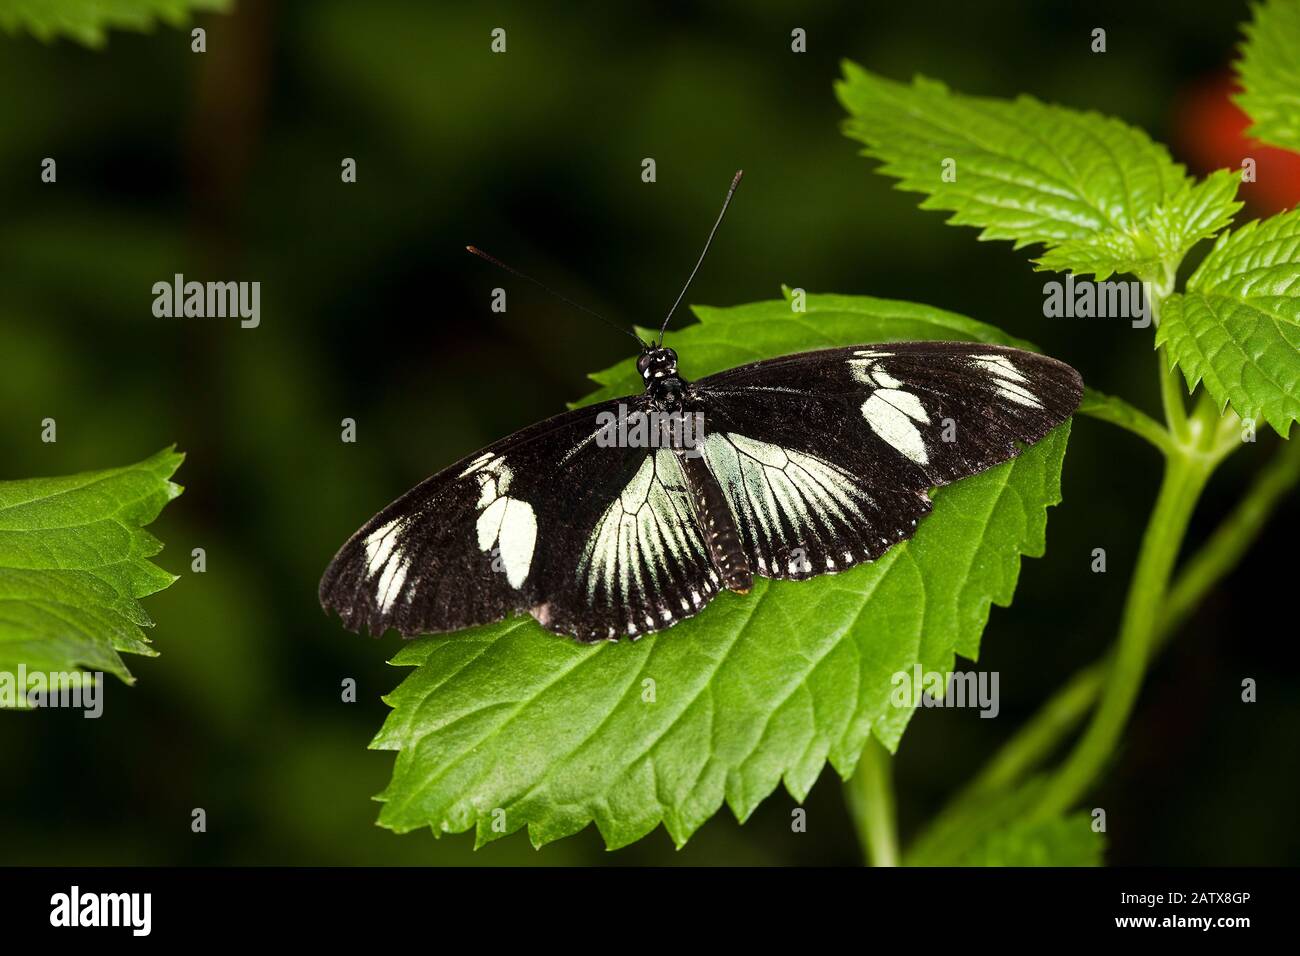 African Swallowtail, papilio dardanus, Butterfly standing on Leaf Stock Photo